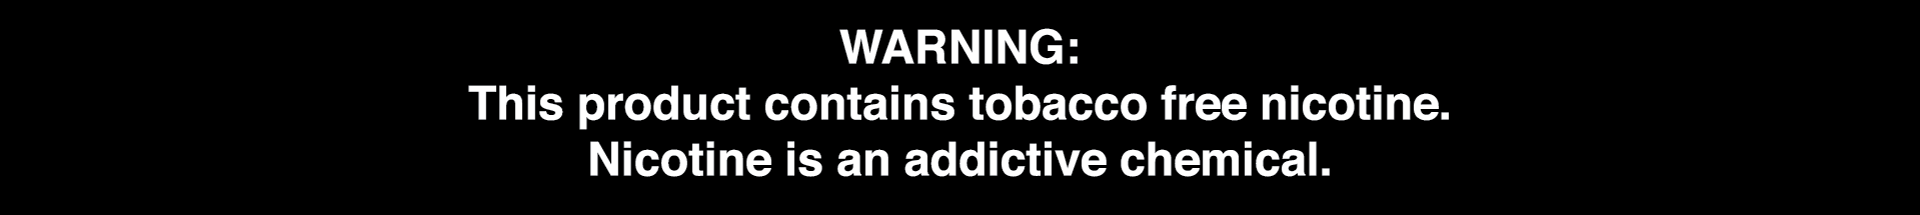 WARNING: This product contains tobacco free nicotine. Nicotine is an addictive chemical.